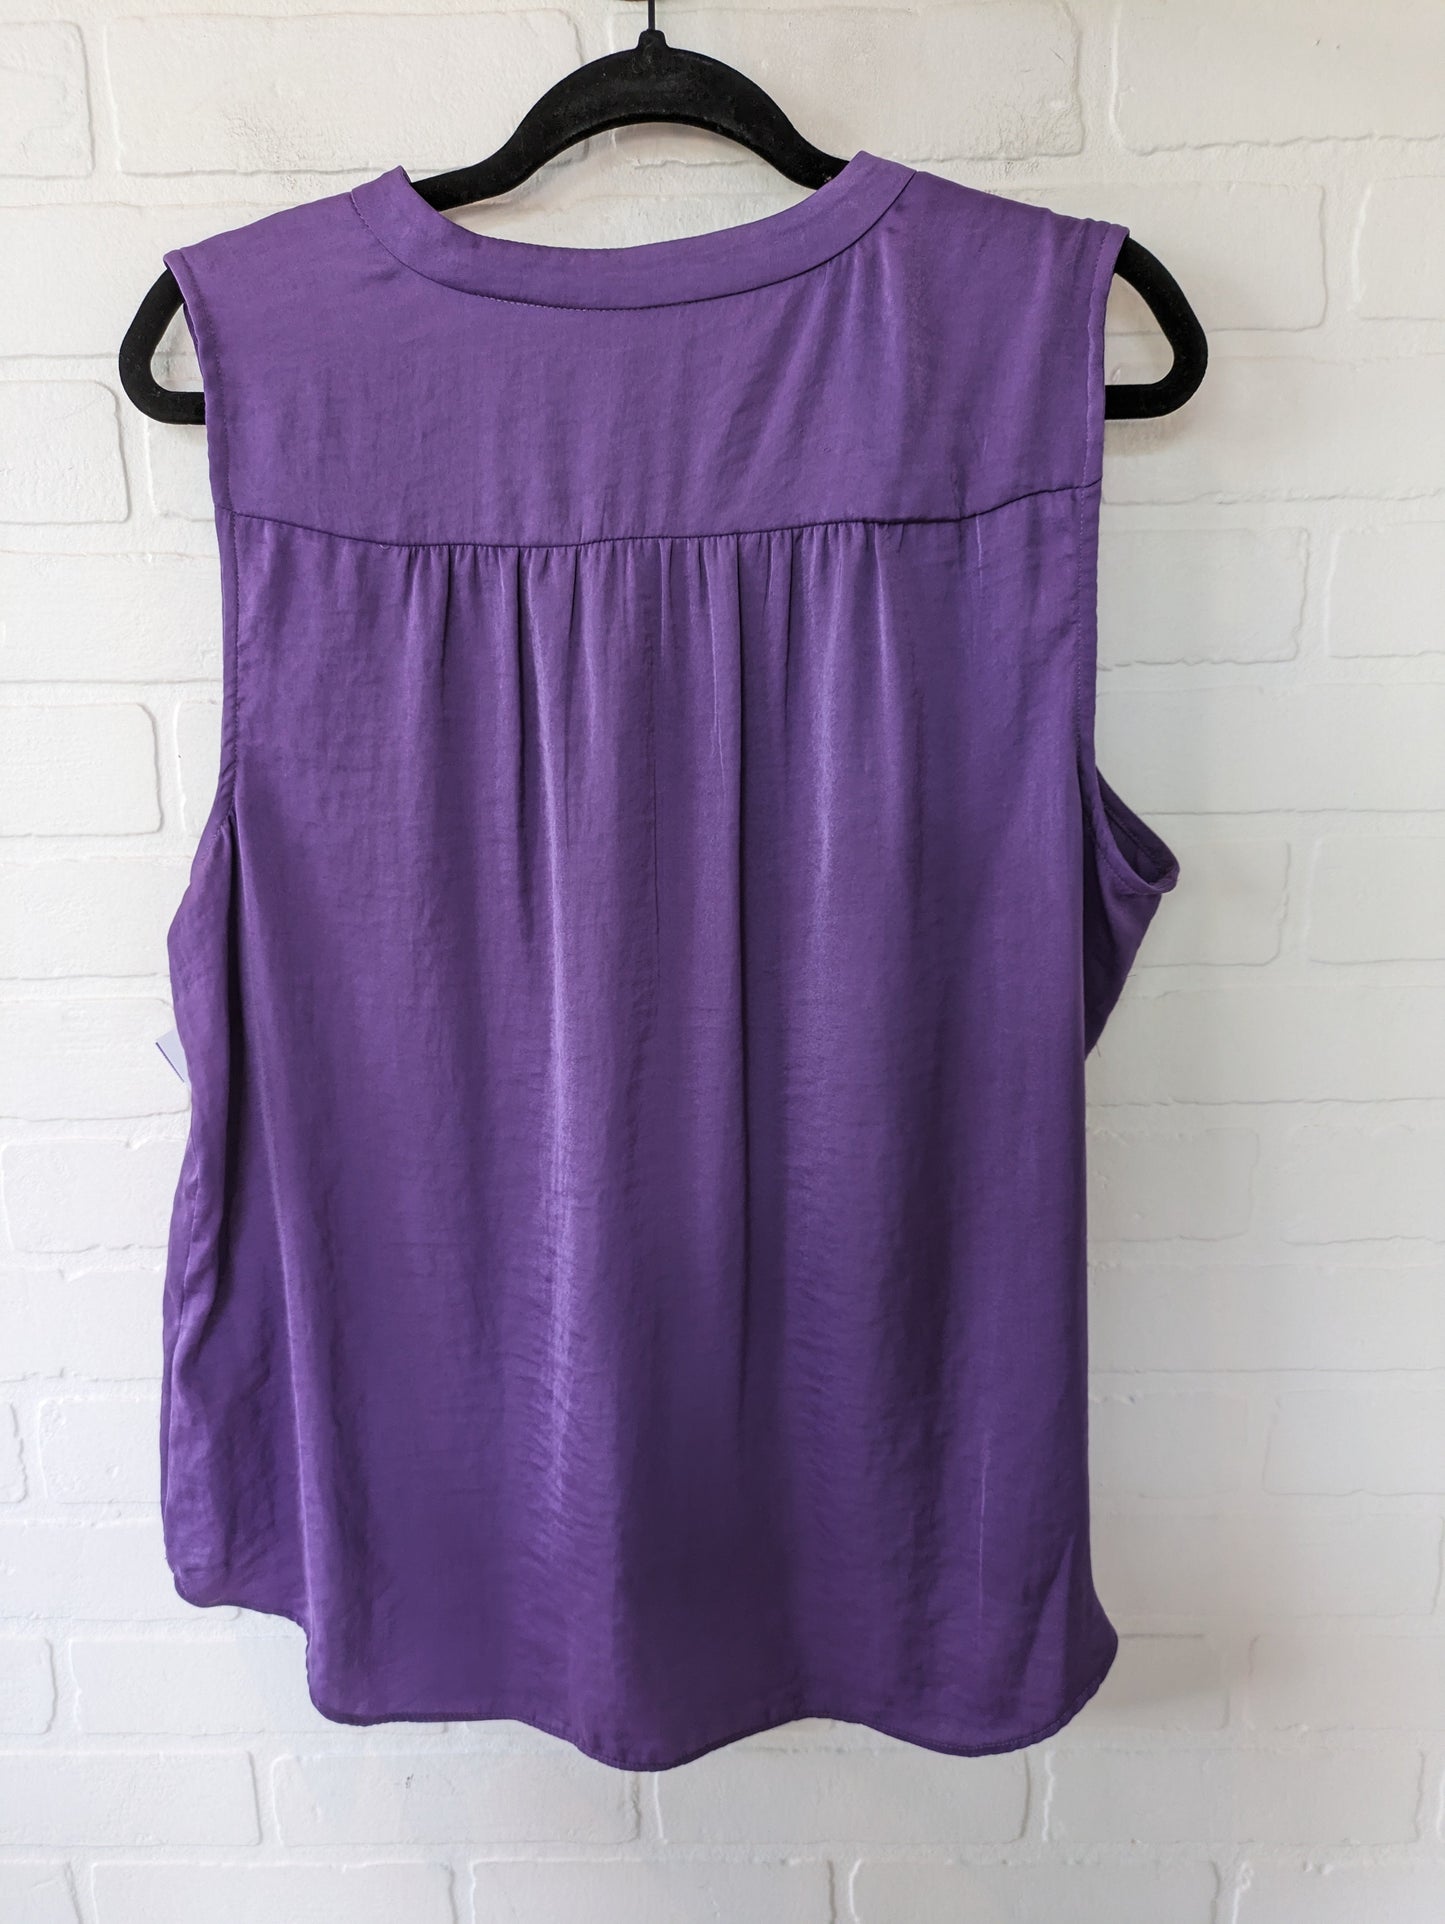 Purple Top Sleeveless Vince Camuto, Size L